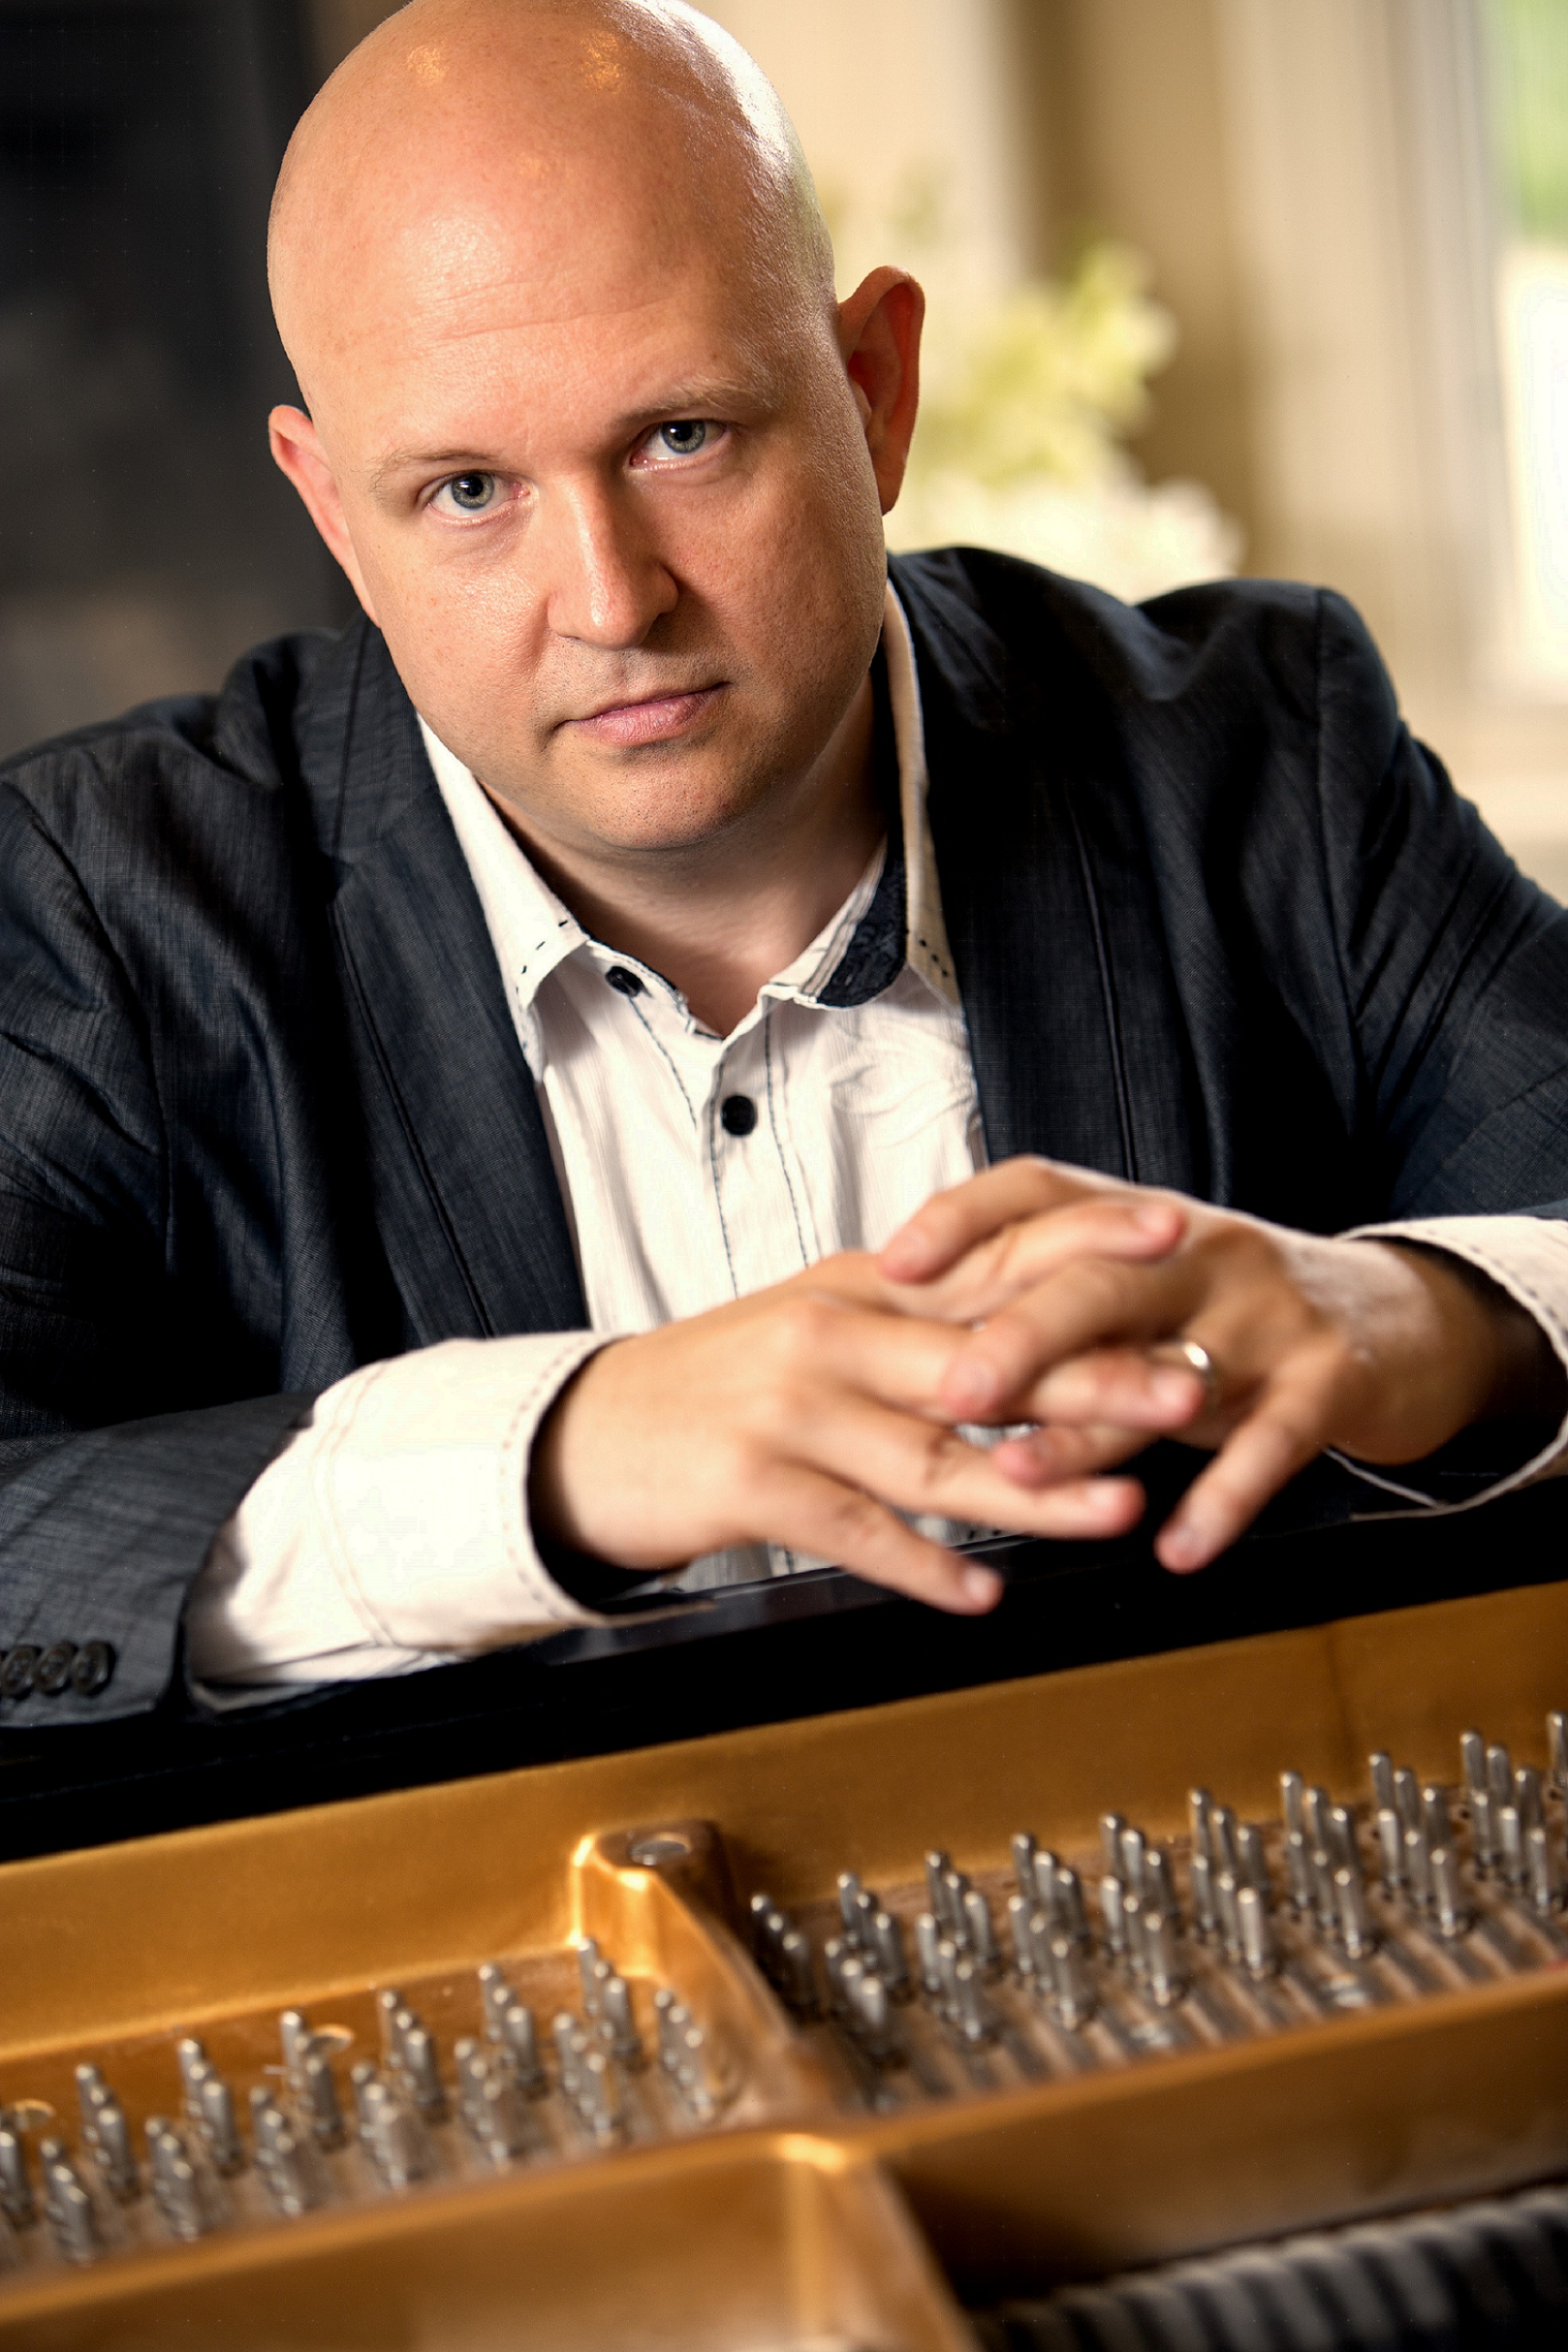 Keys to Excellence Piano Series opens Sept. 25 with Steven Spooner ...